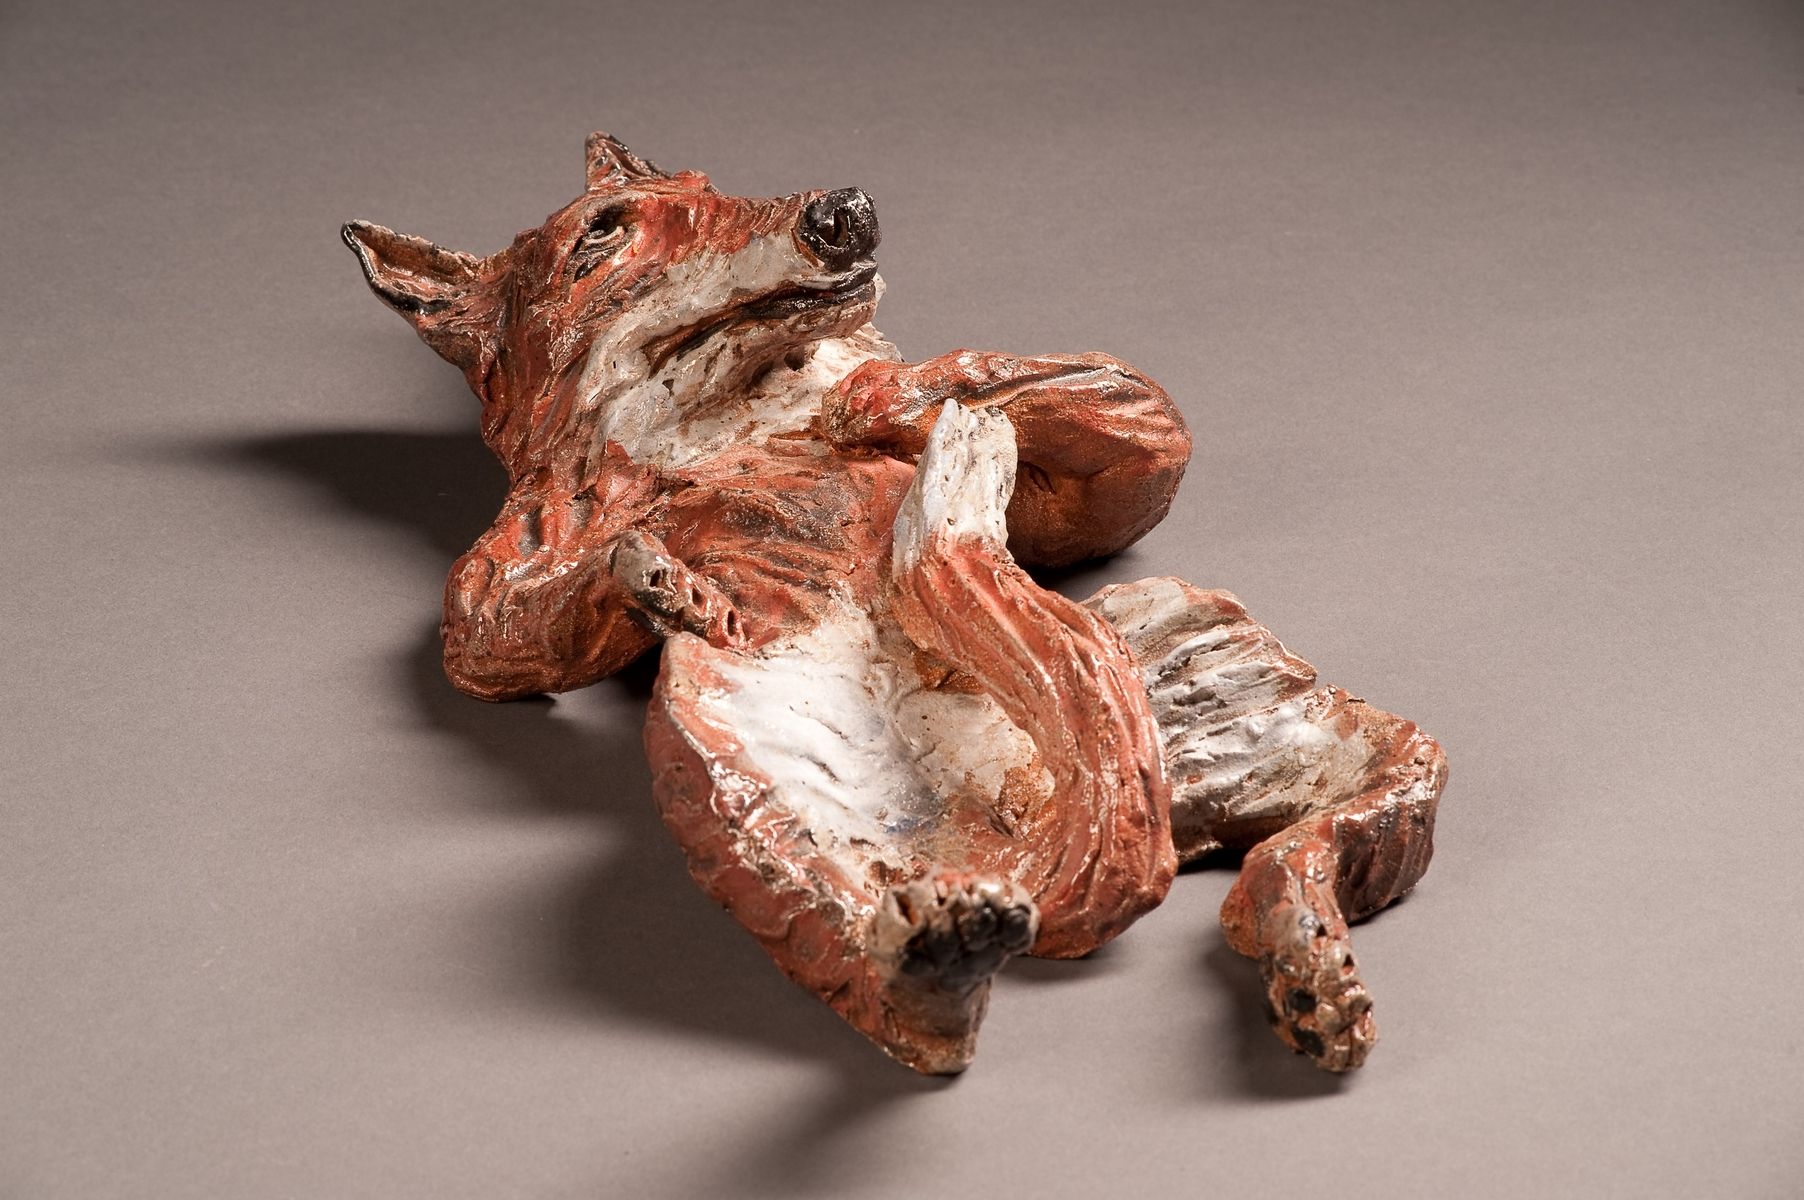 hand-crafted-a-clay-fox-sculpture-named-megan-fox-by-shack-art